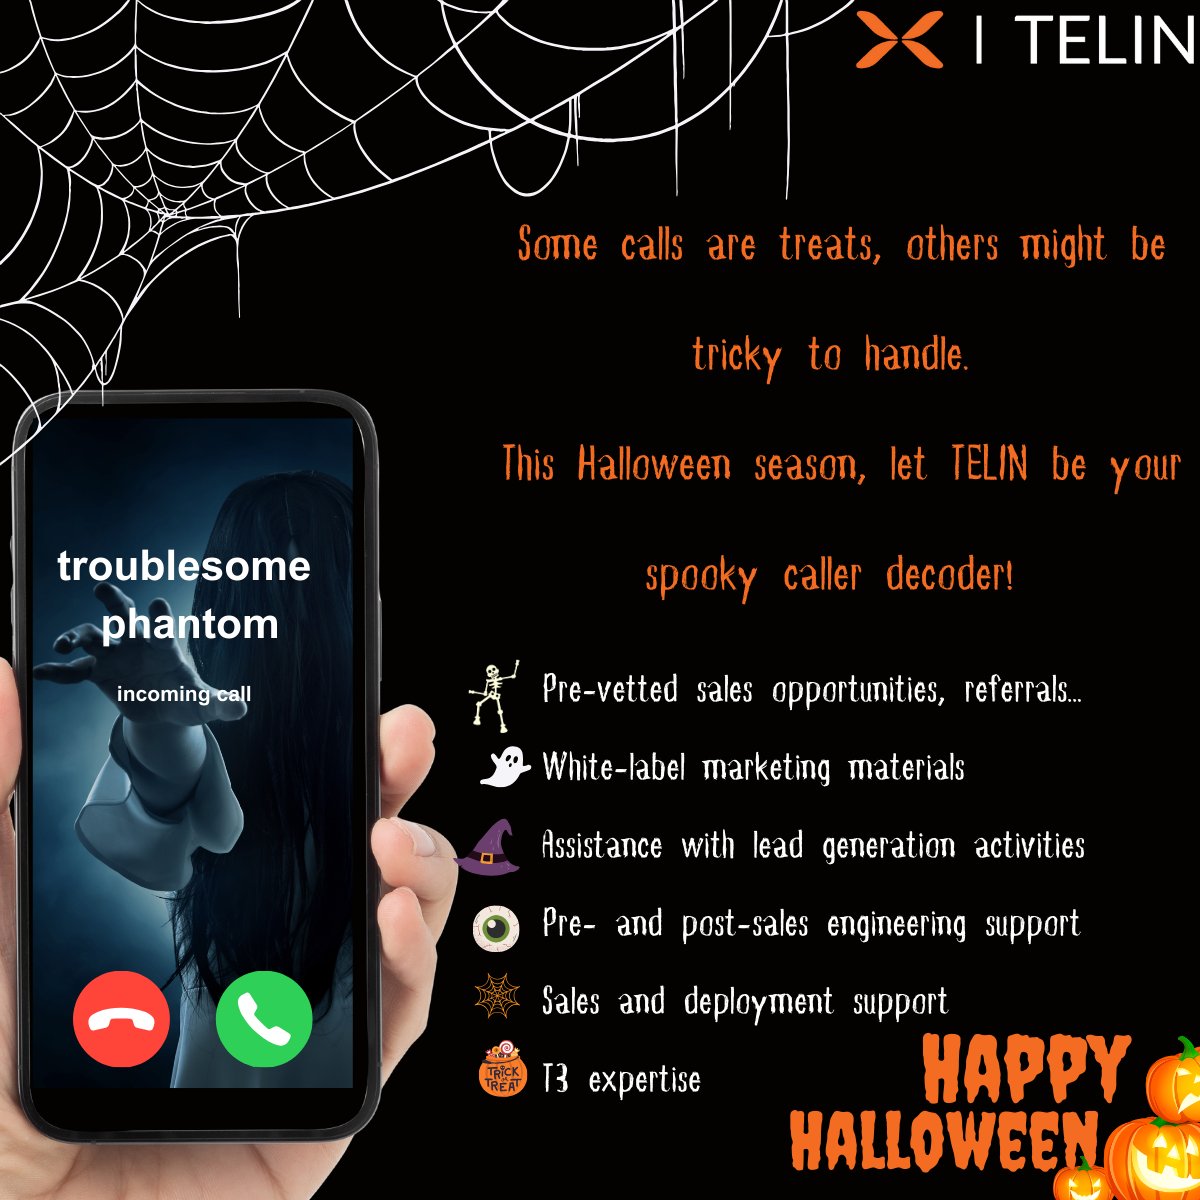 🎃👻 Happy Halloween from #Telin -Your All-in-One VOIP Distributor! 👻🎃

As the spookiest night of the year approaches, Telin is here to make your #TelecomSolutions less scary and more streamlined. 🕷️
No tricks, just treats! 🍬
#HappyHalloween  #OneStopShop #ippbx